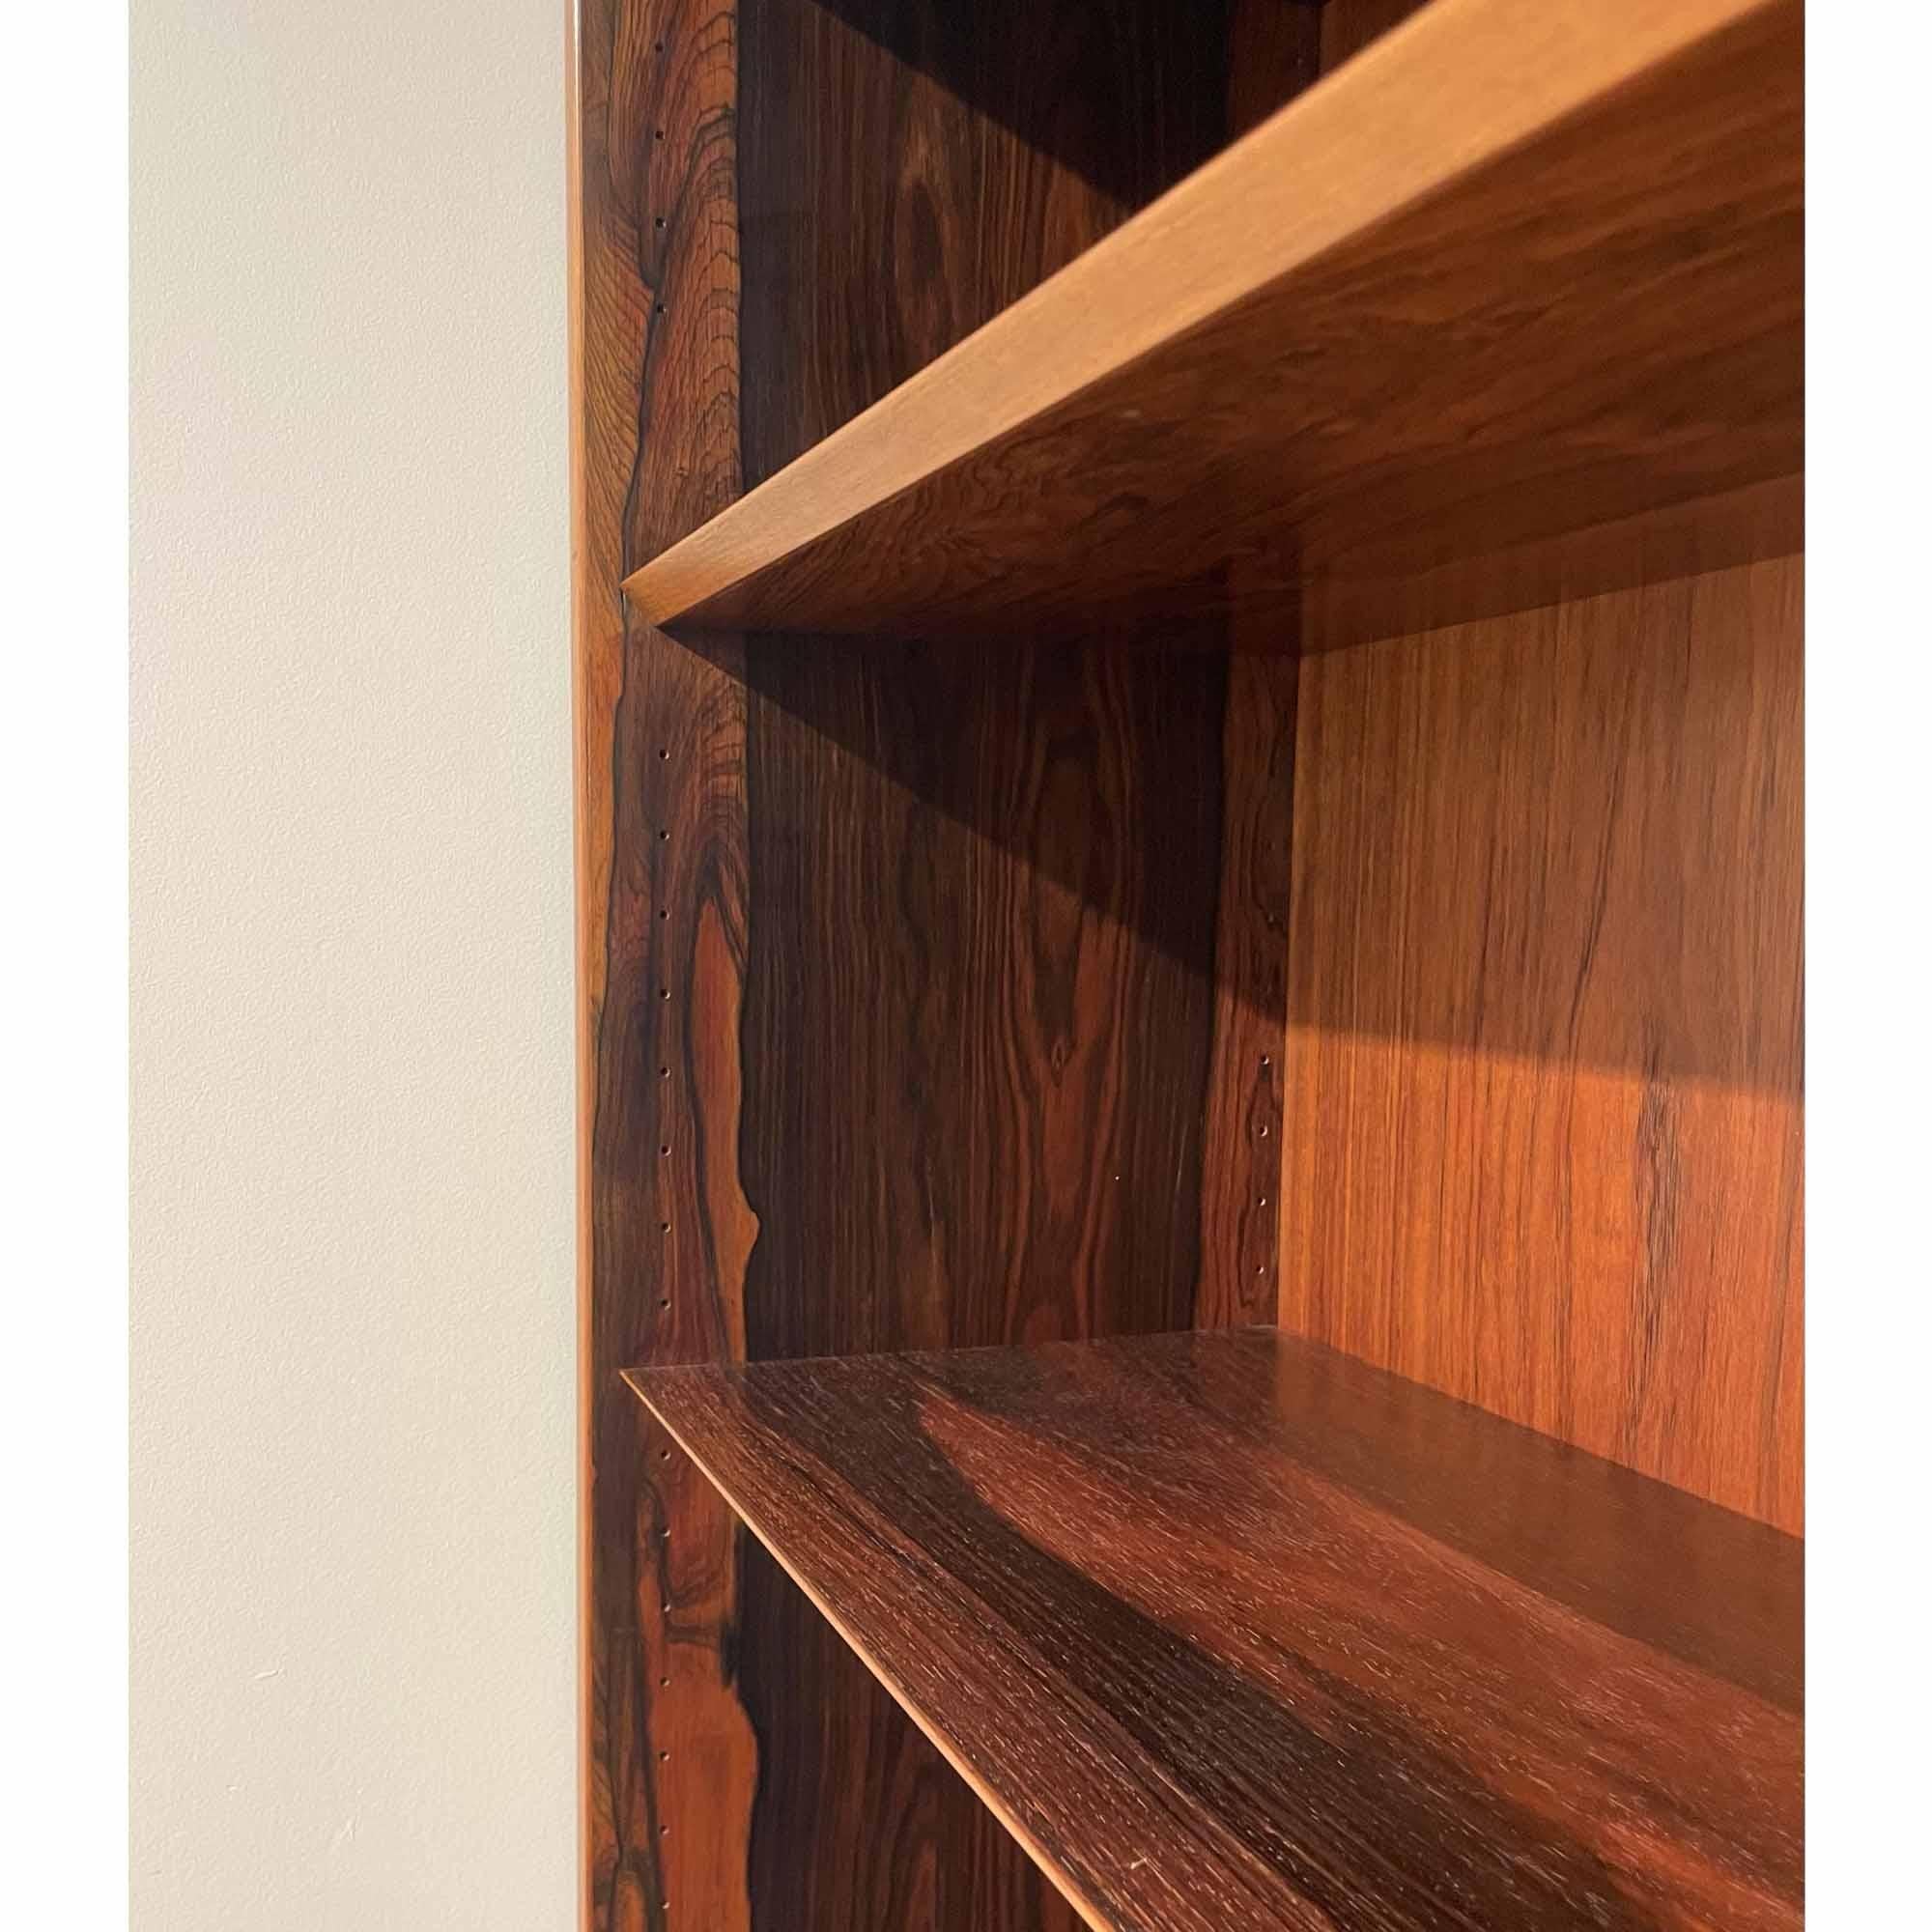 Danish Rosewood bookcase by Poul Hundevad